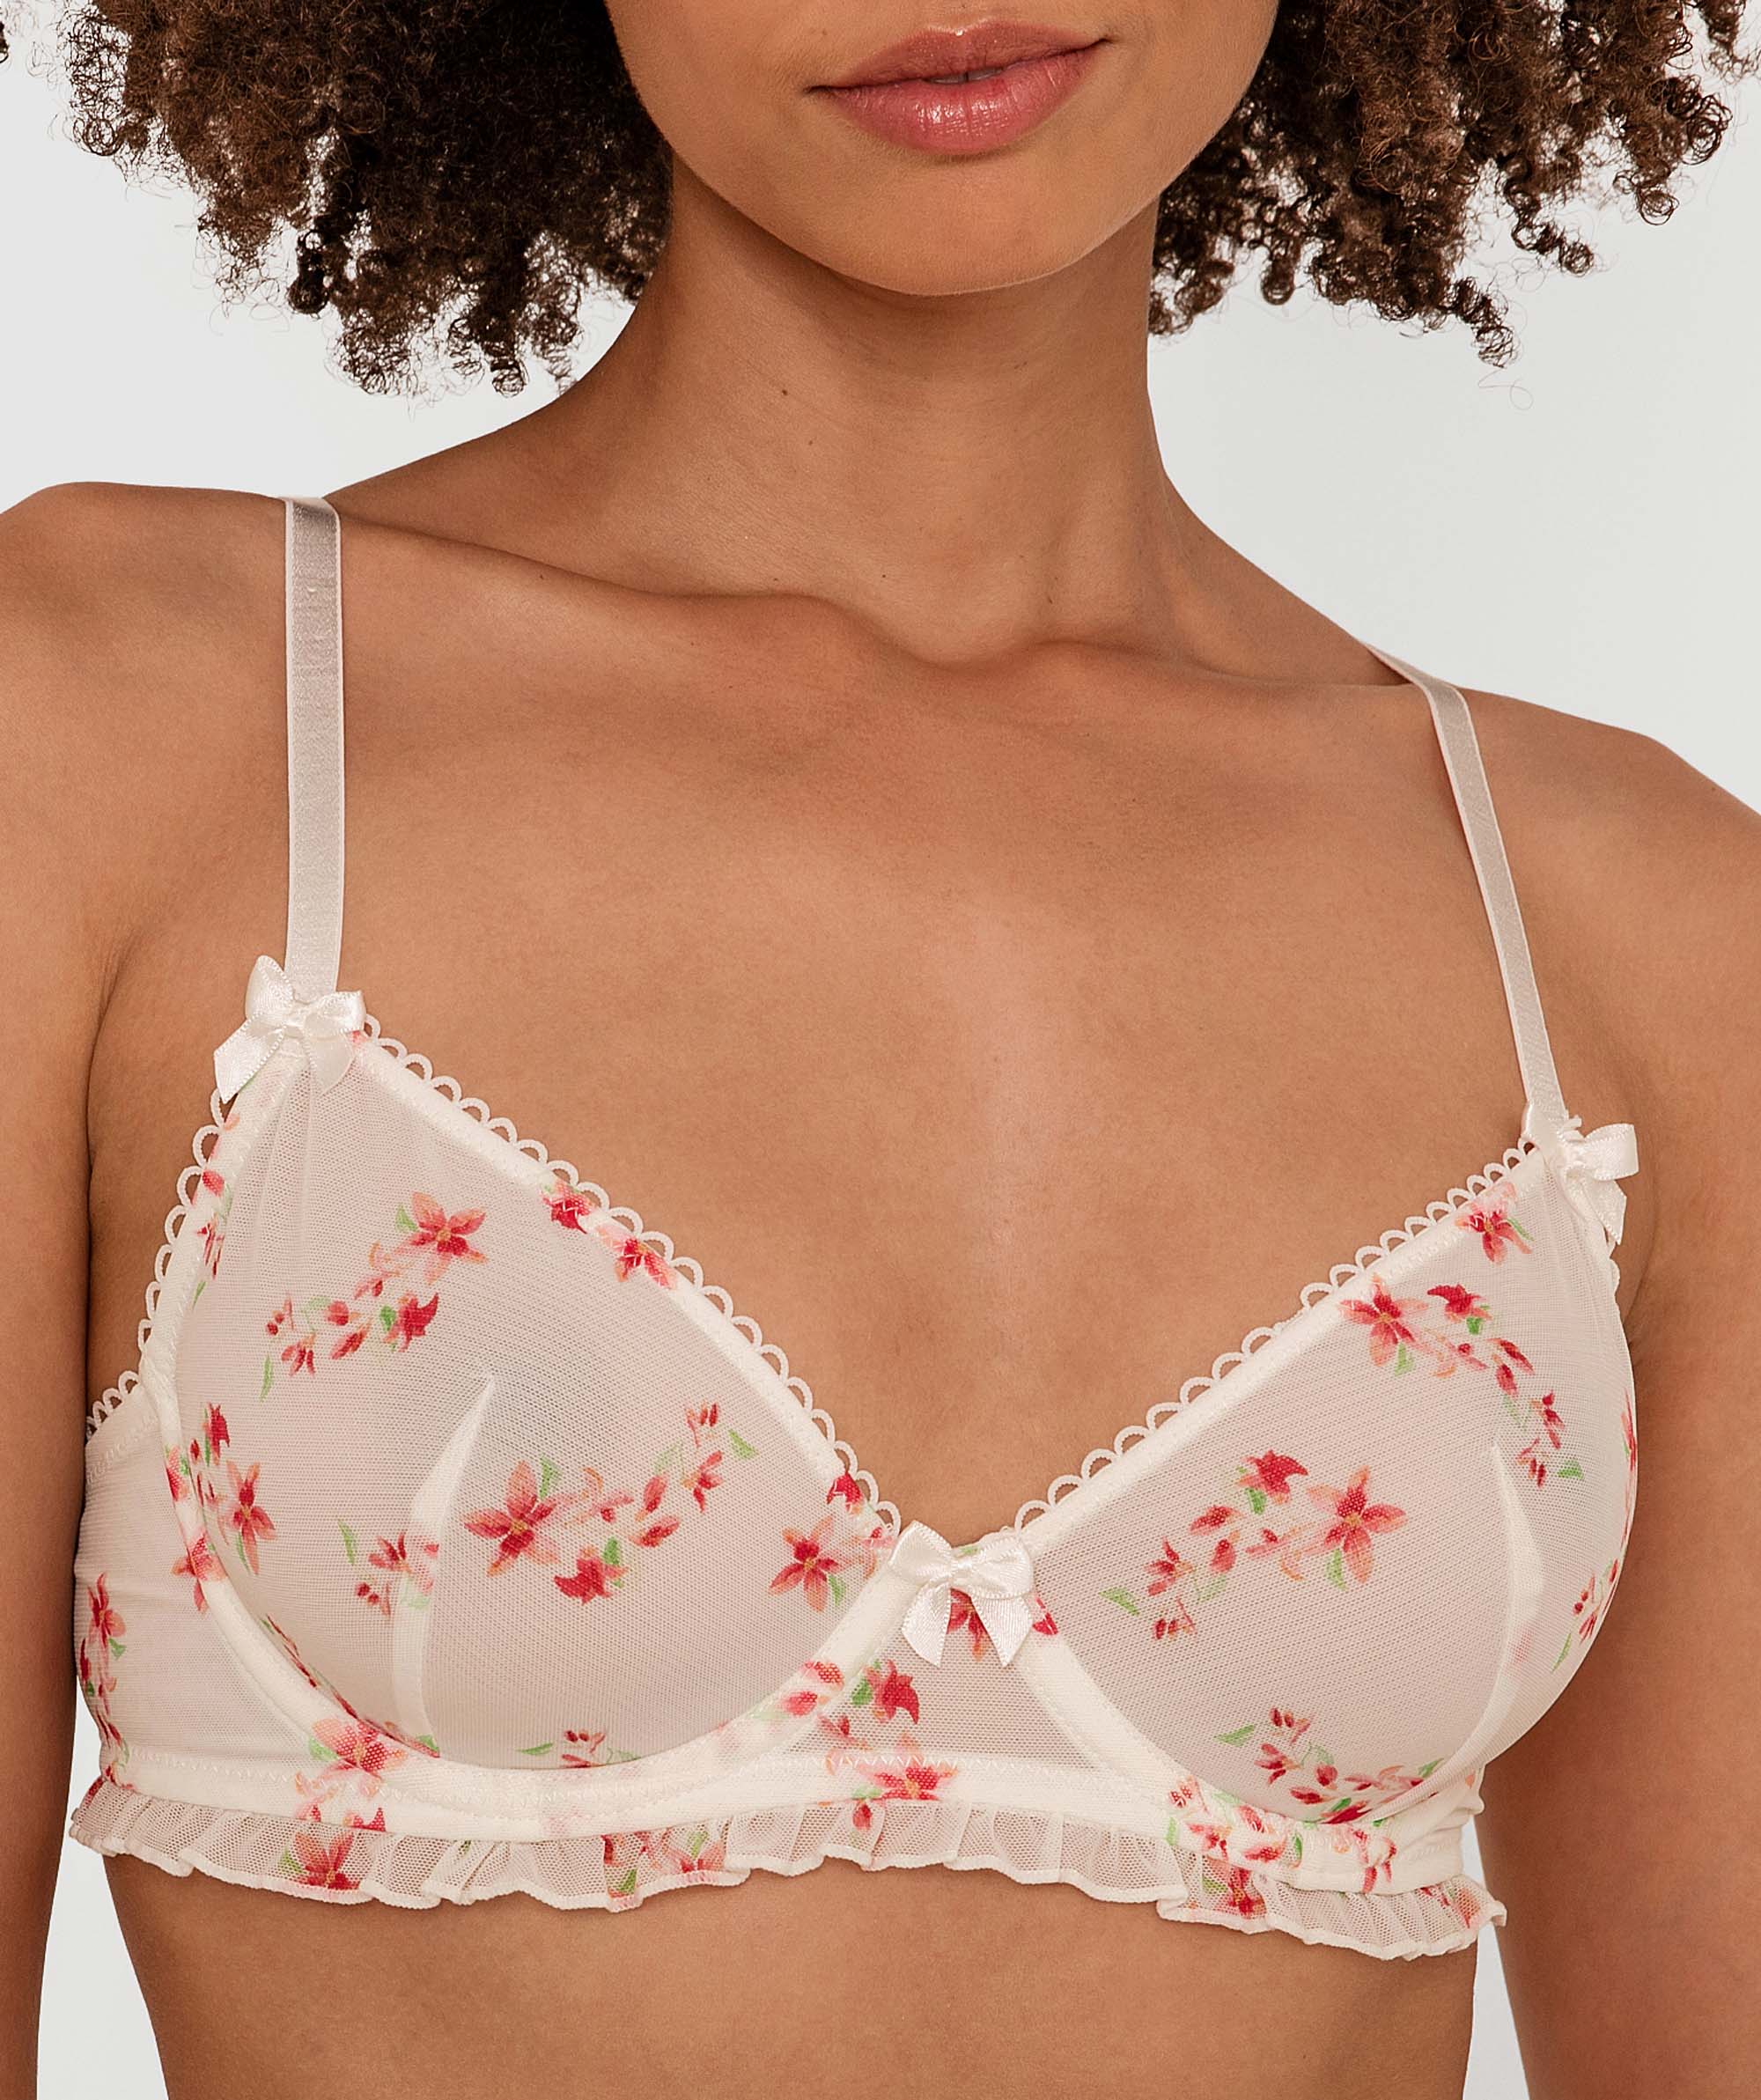 Canna Lily Underwire Bra - Floral Print